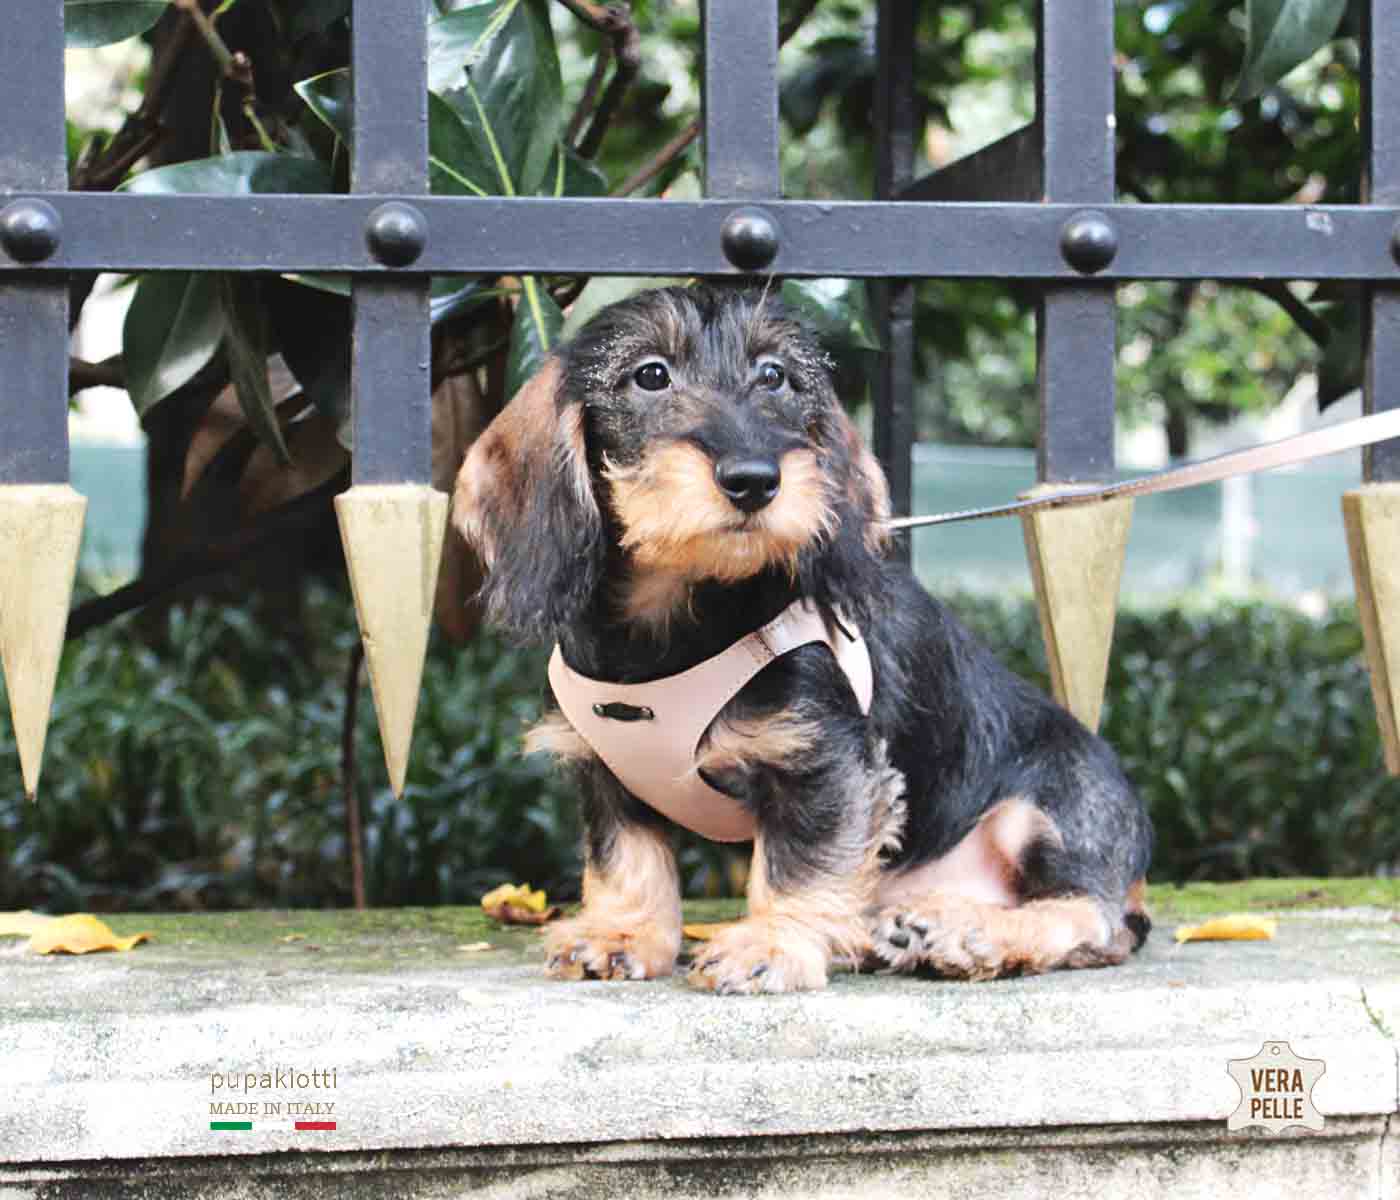 PREMIUM. Leather harness for dog